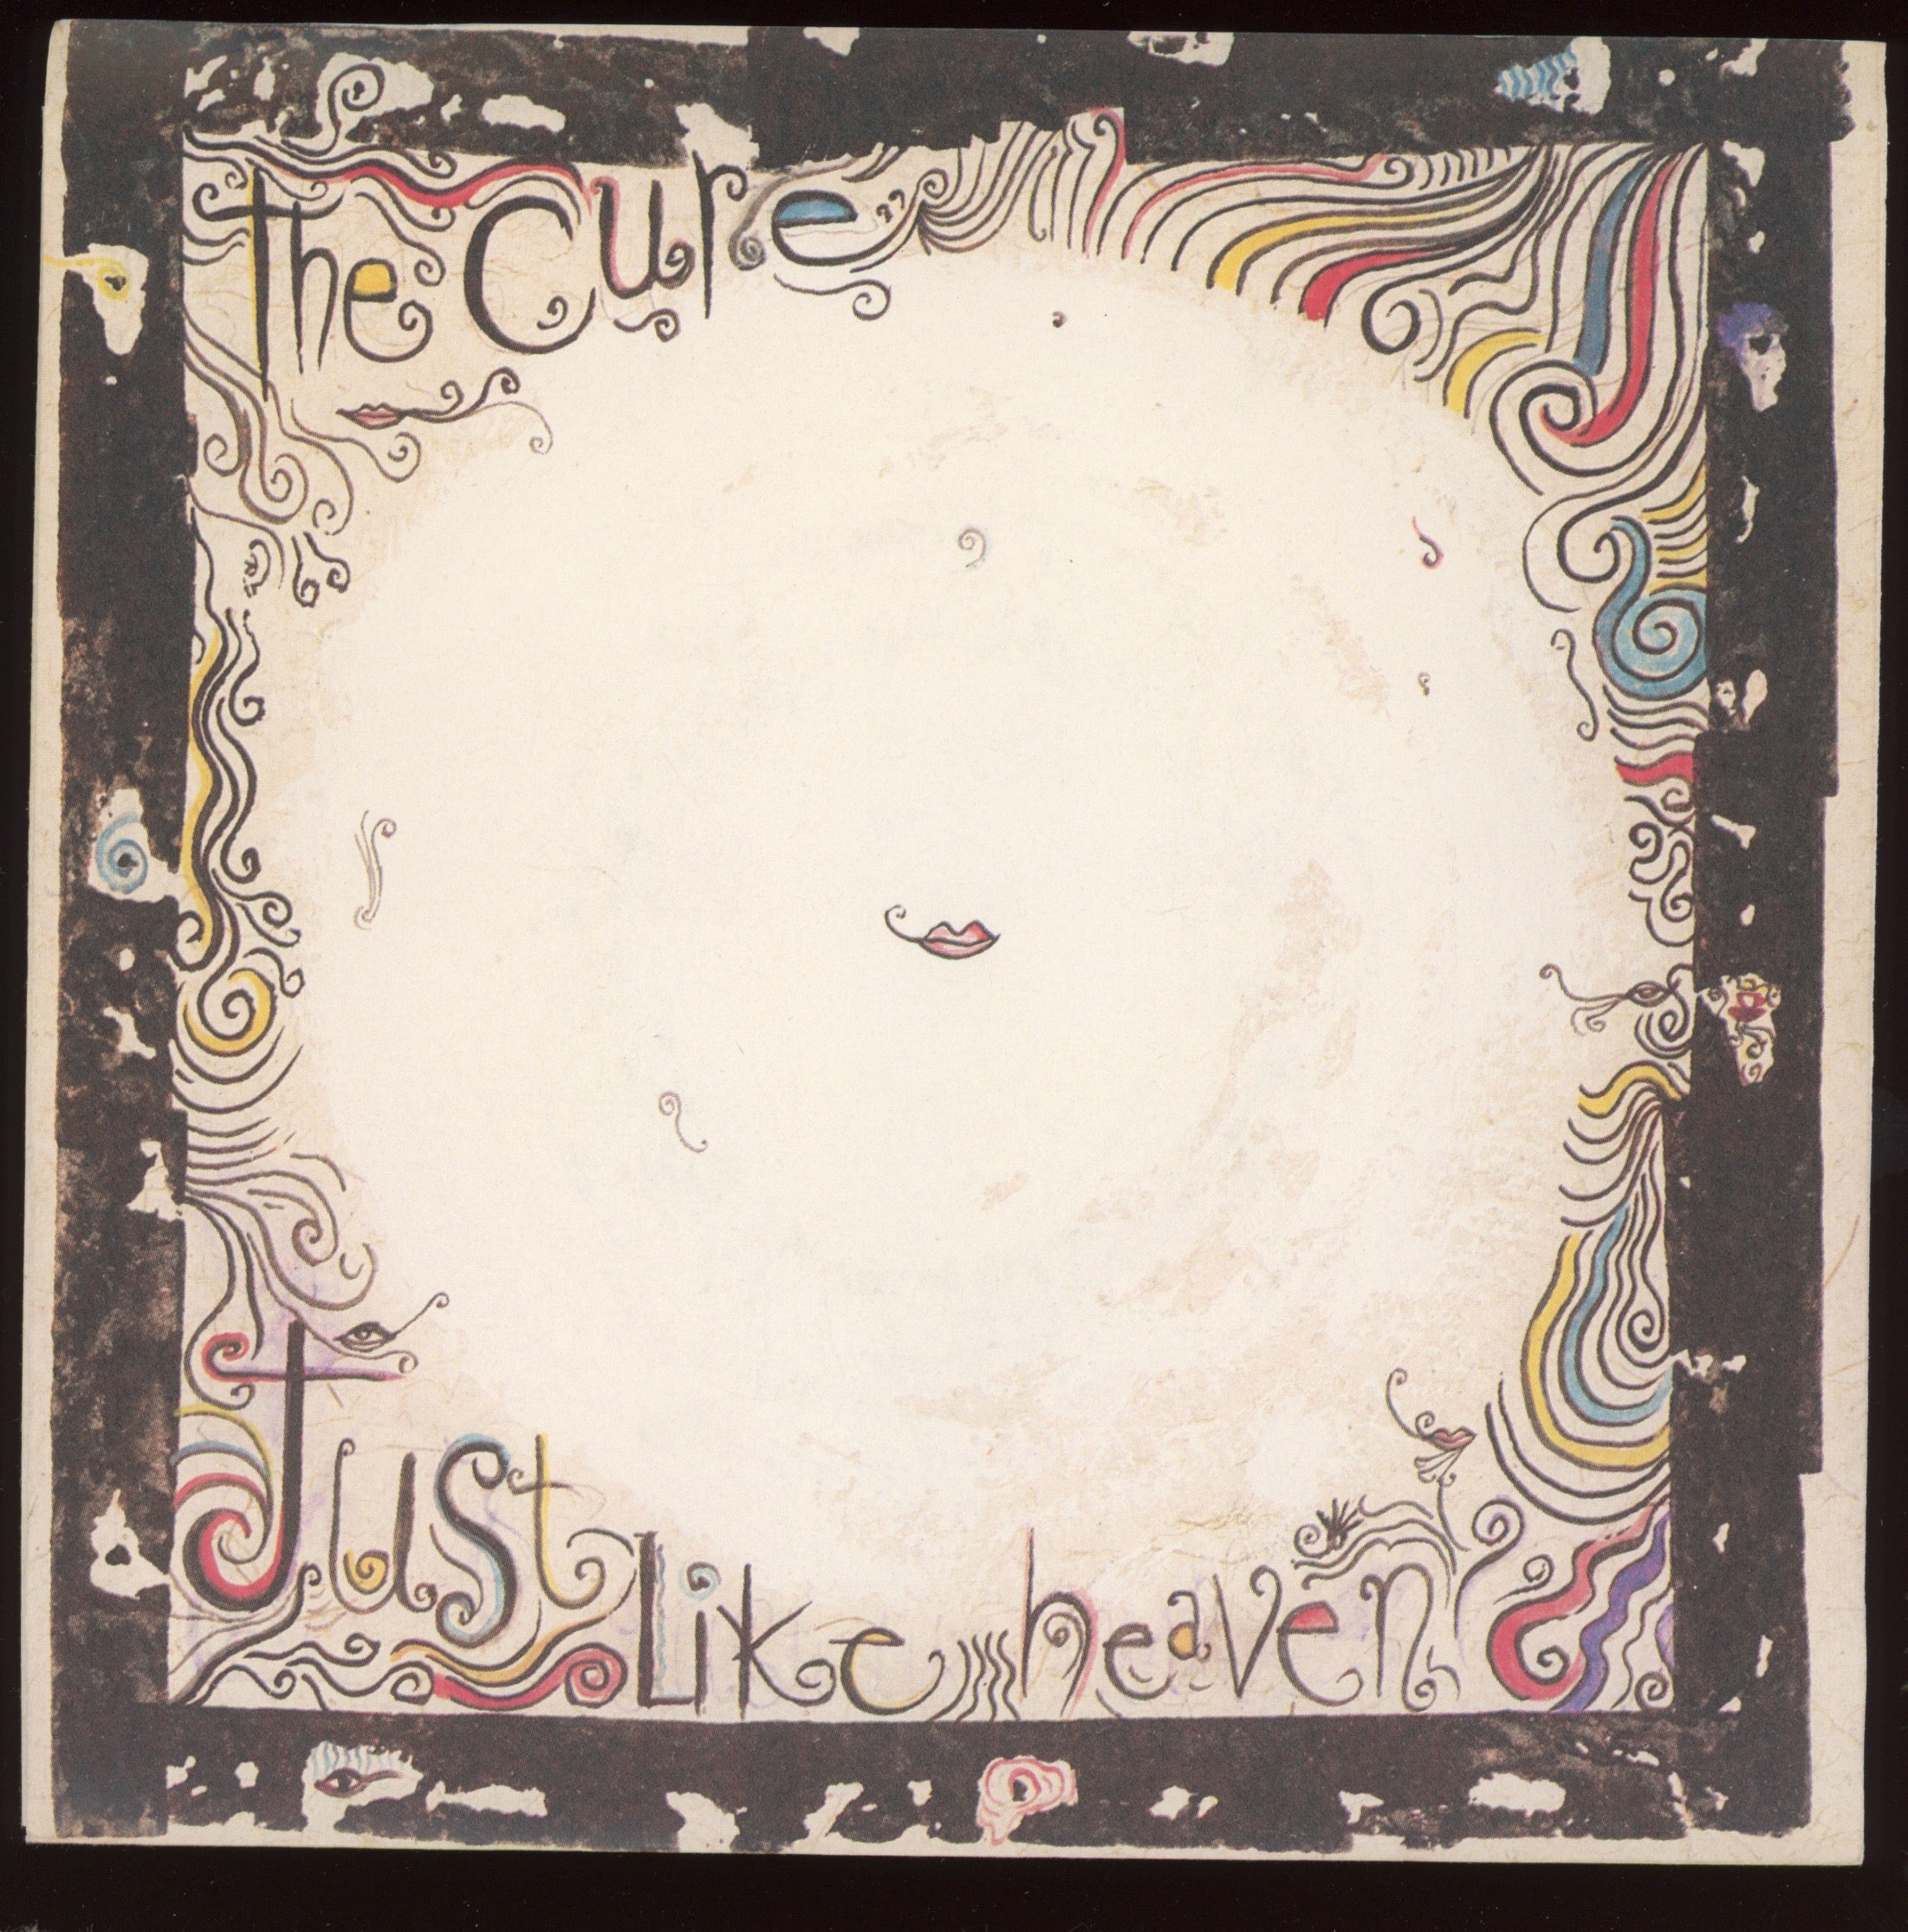 The Cure - Just Like Heaven on Elektra With Picture Sleeve